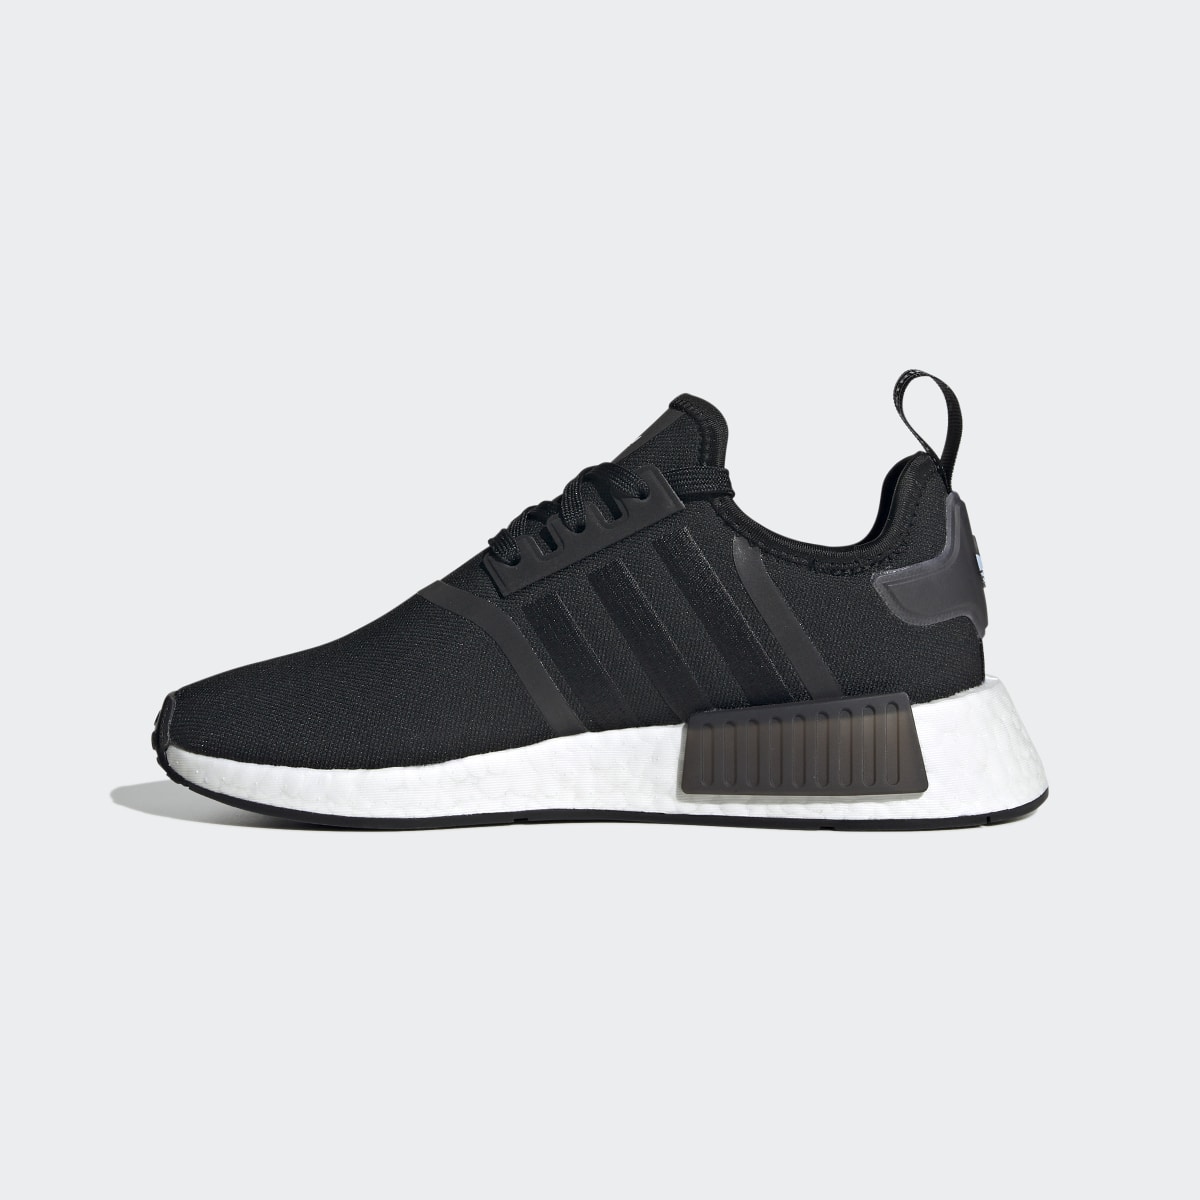 Adidas NMD_R1 Shoes. 13